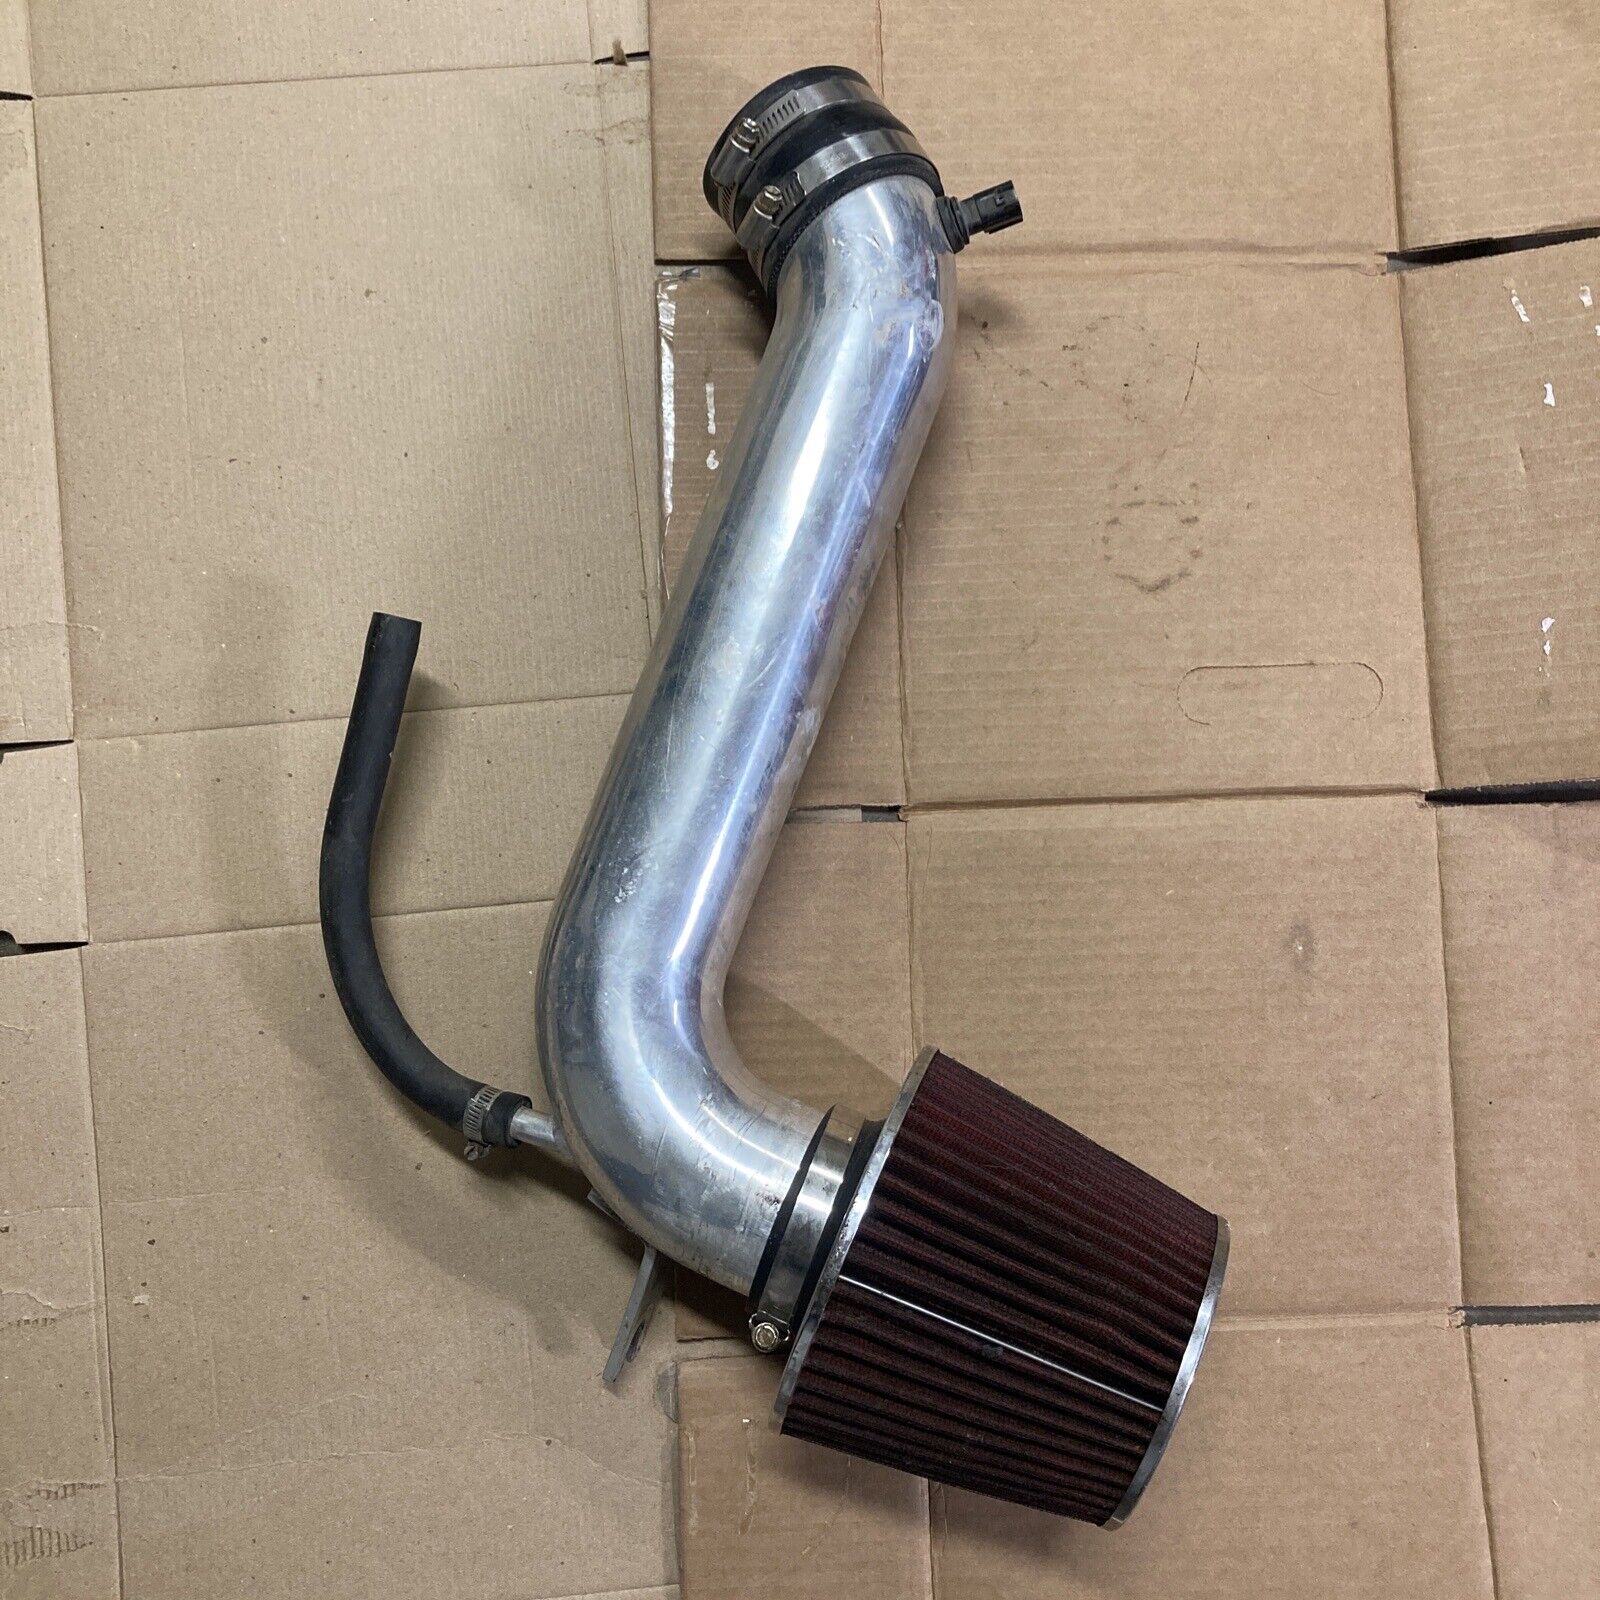 2010 challenger srt8 Cold Air Intake With Filter No Heat Shield